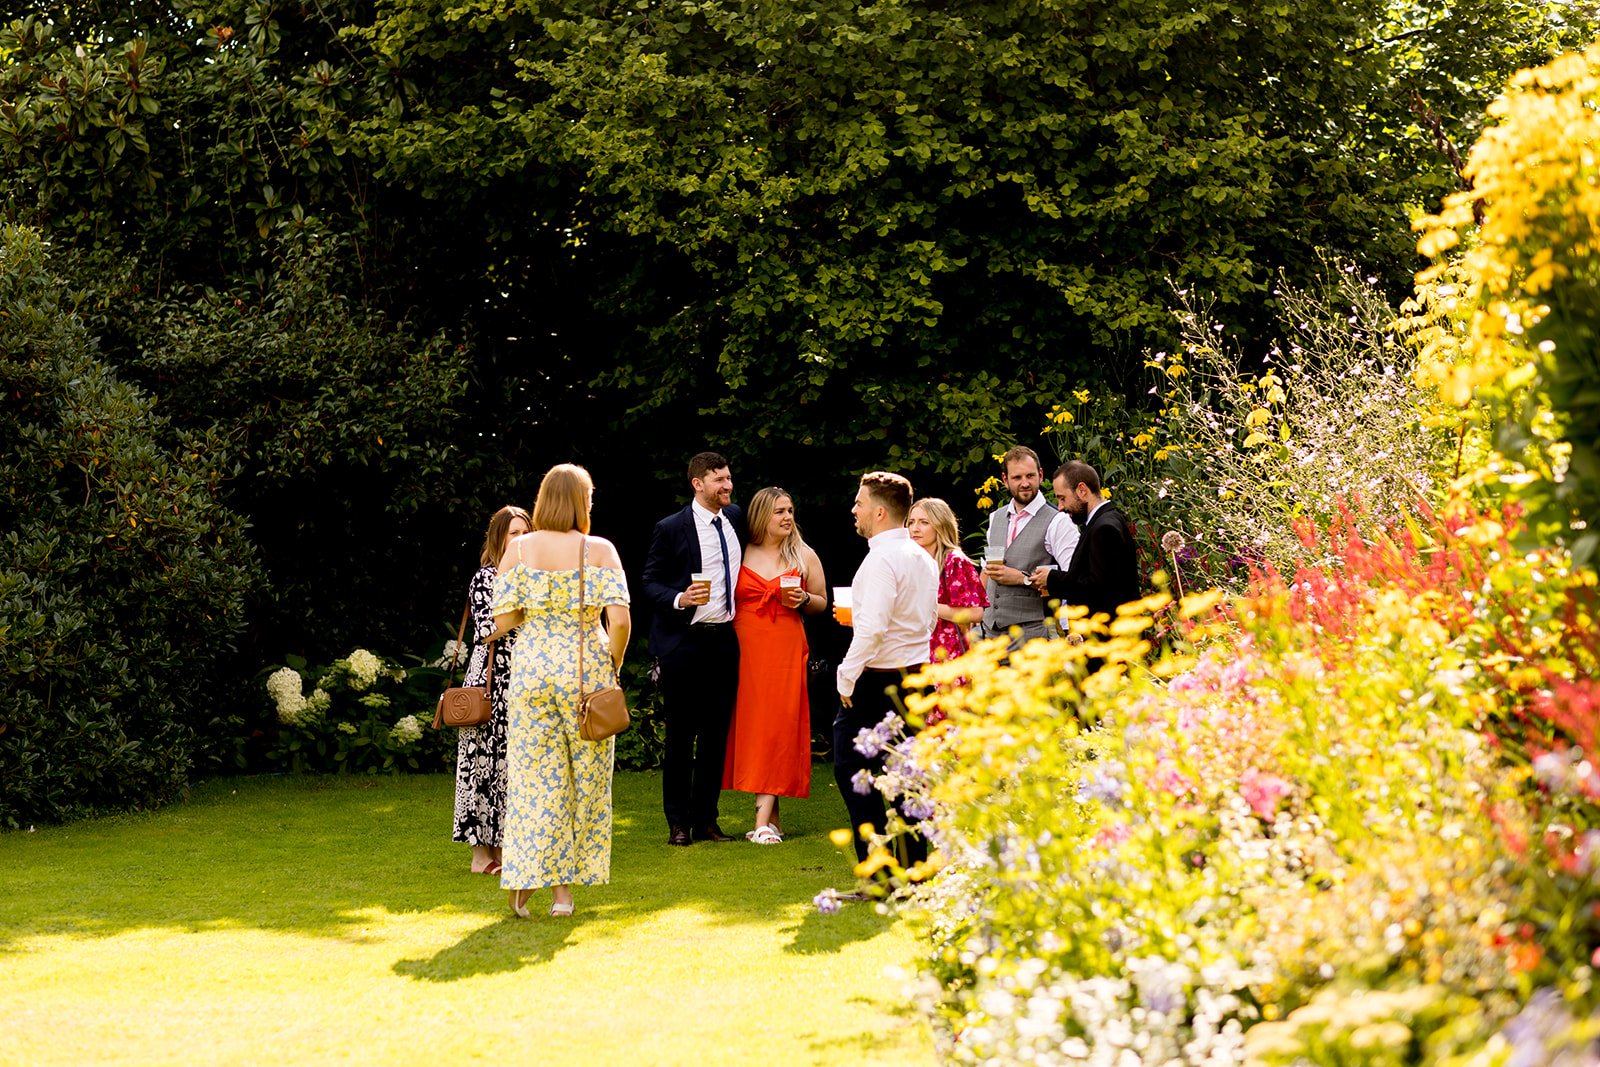 Wedding guests relaxing in the shade